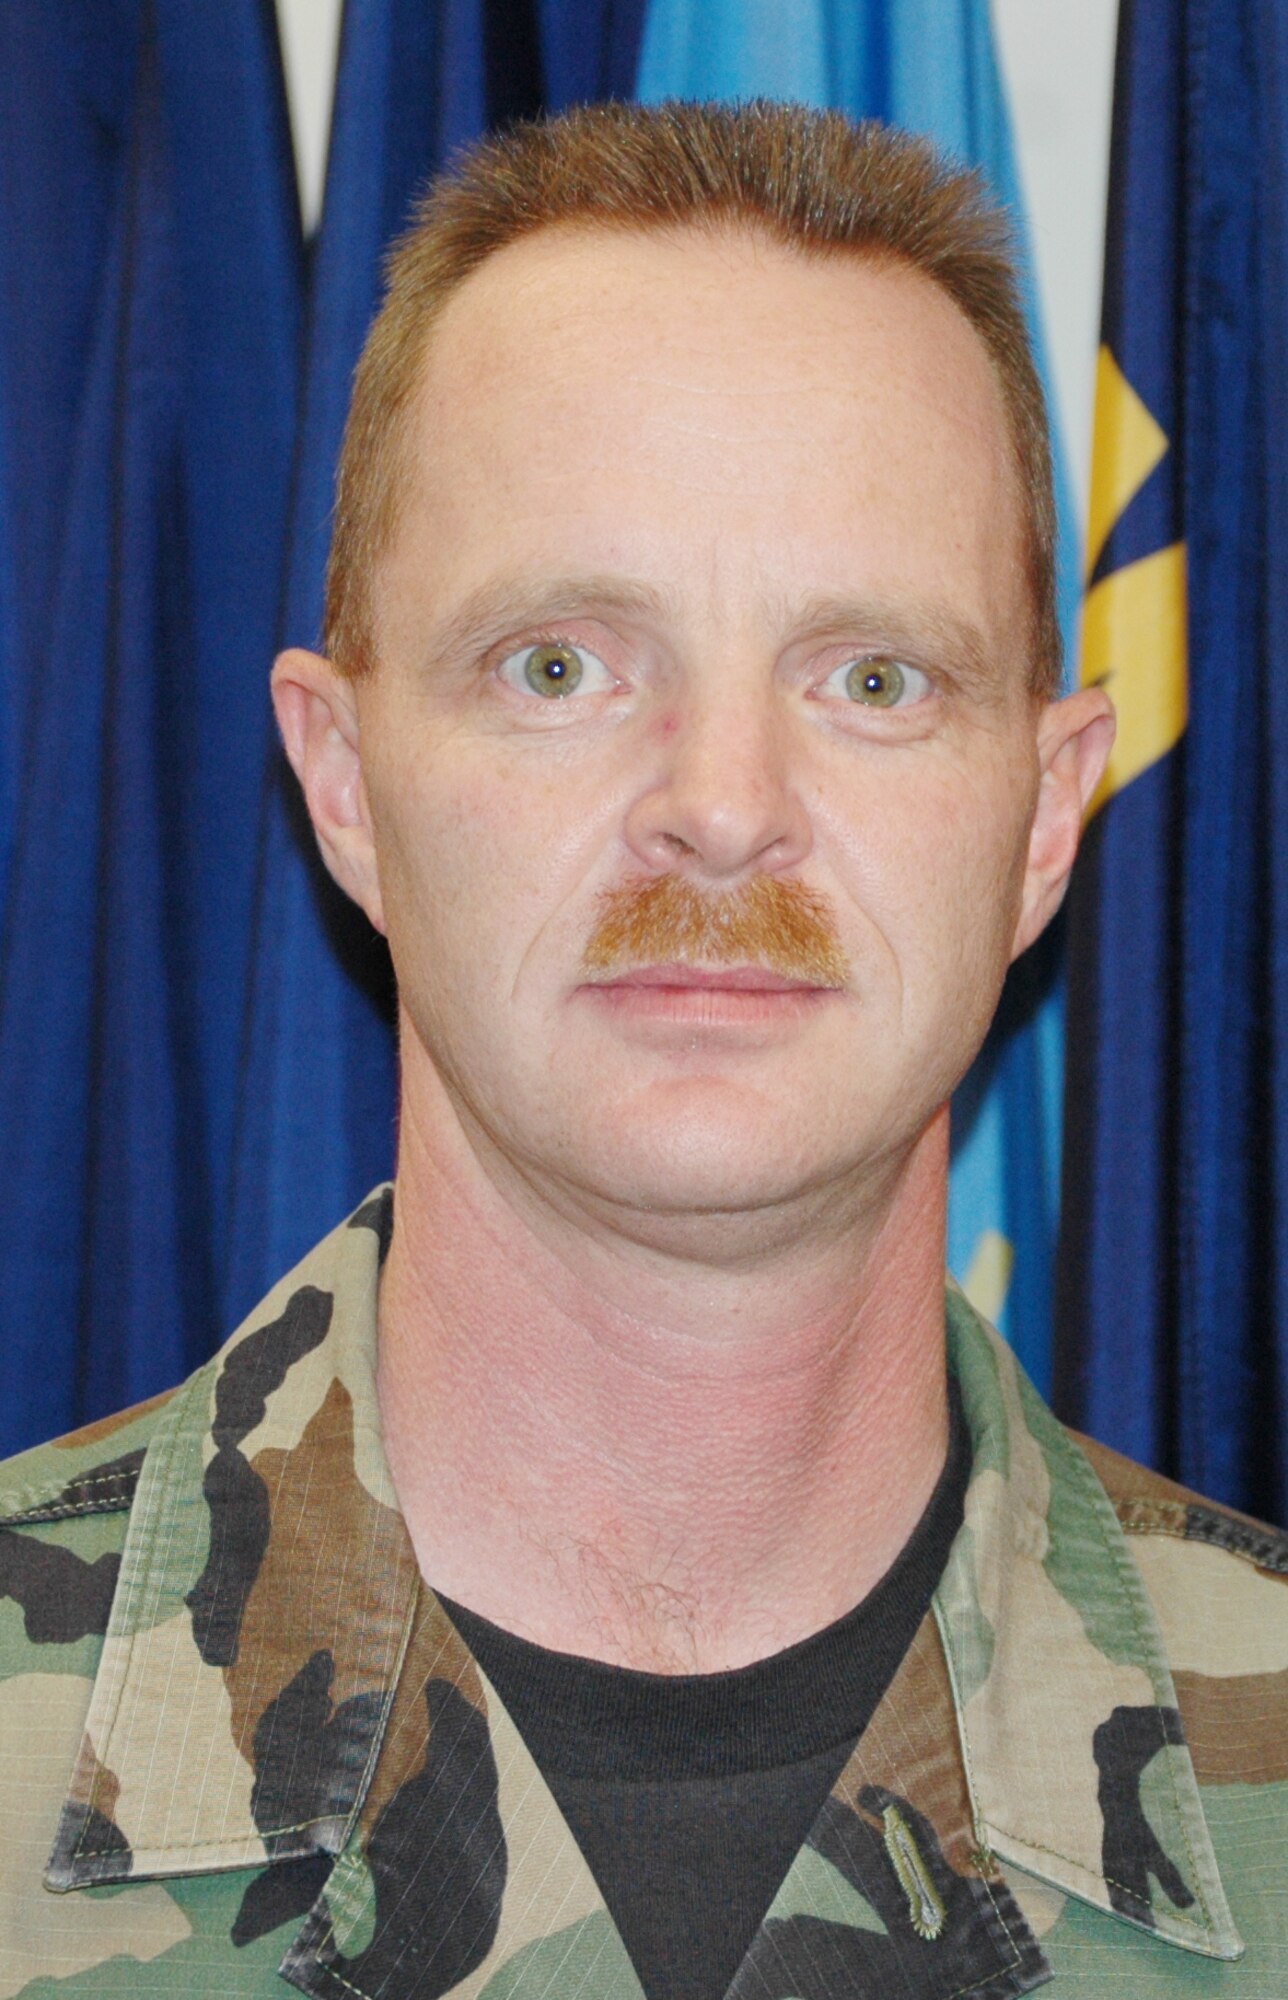 Tech. Sgt. Dee Brower hails from Idaho Falls, Idaho and is the contingency operations noncommissioned officer in charge for the 460th Logistics Readiness Squadron. He is the Warrior of the Week for Nov. 23 through 29. 
